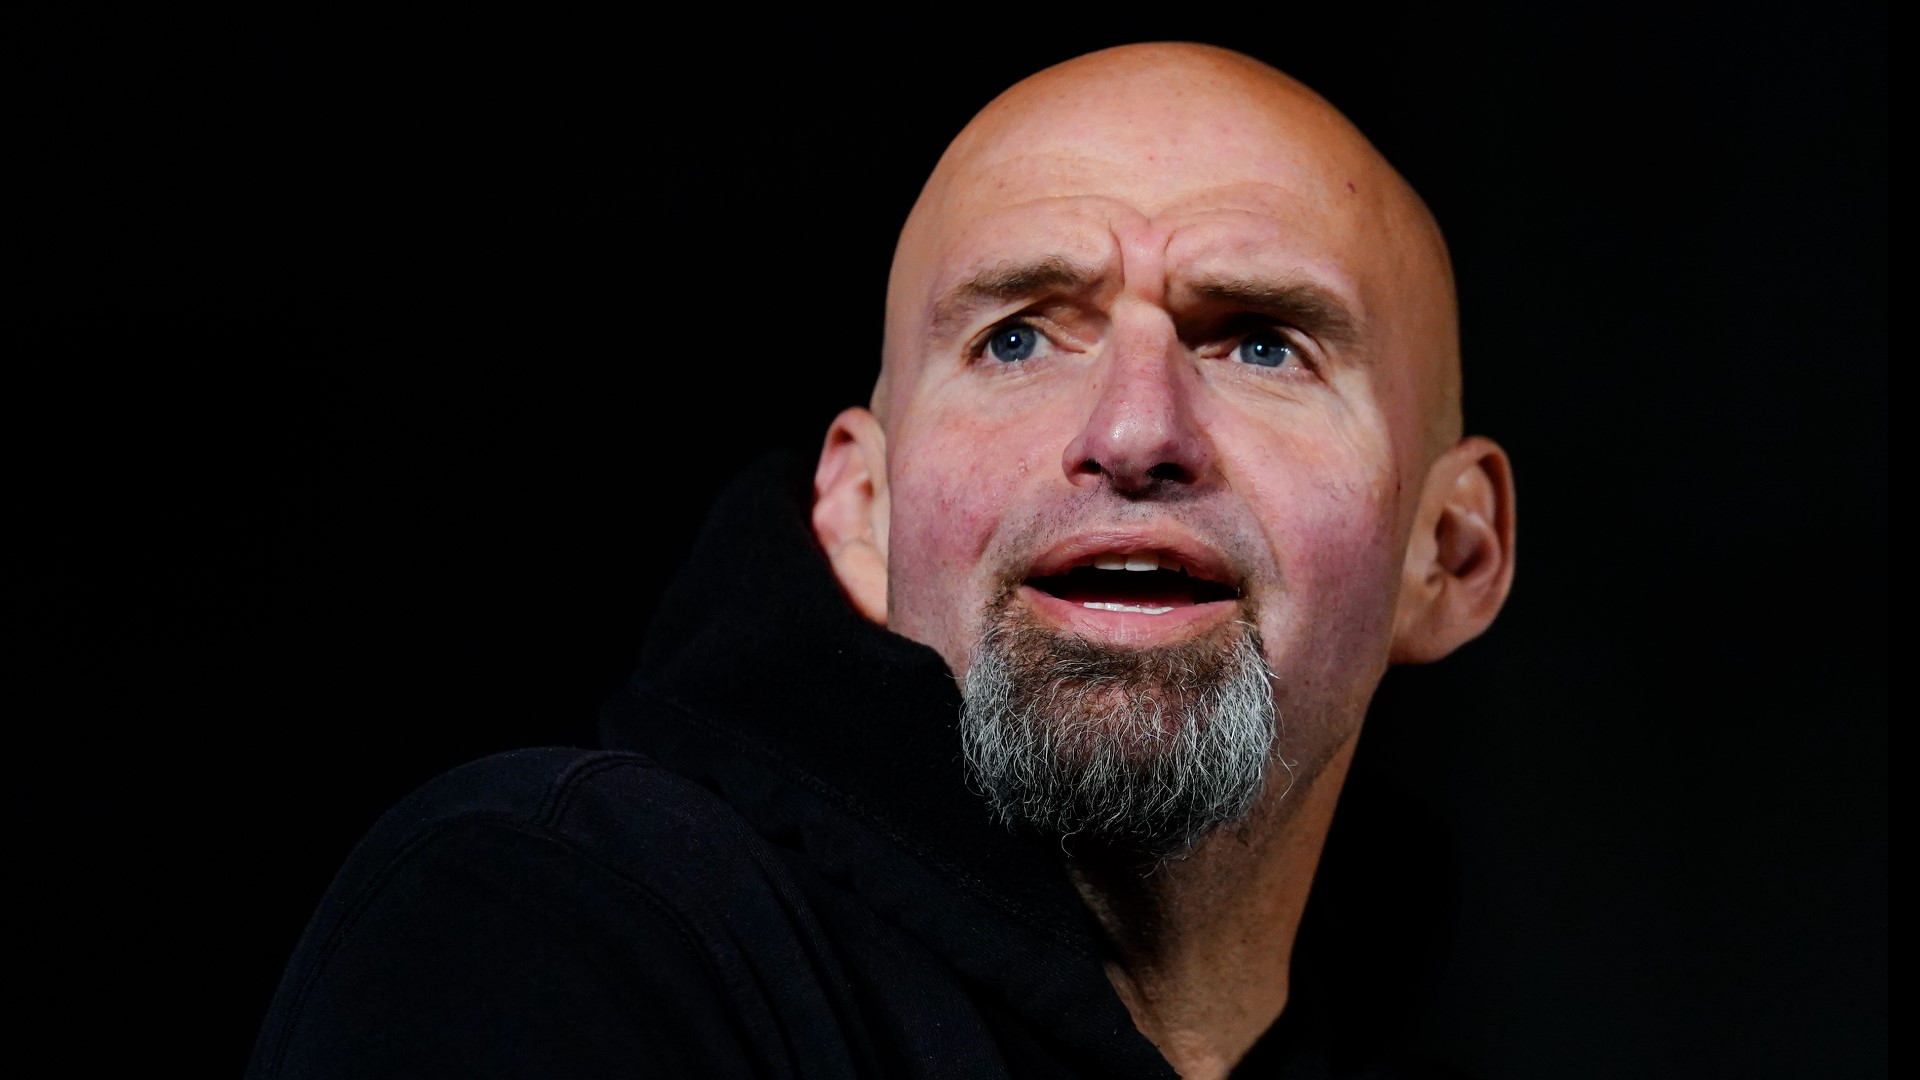 Pennsylvania Senator John Fetterman has checked himself into Walter Reed National Military Medical Center for treatment of clinical depression.